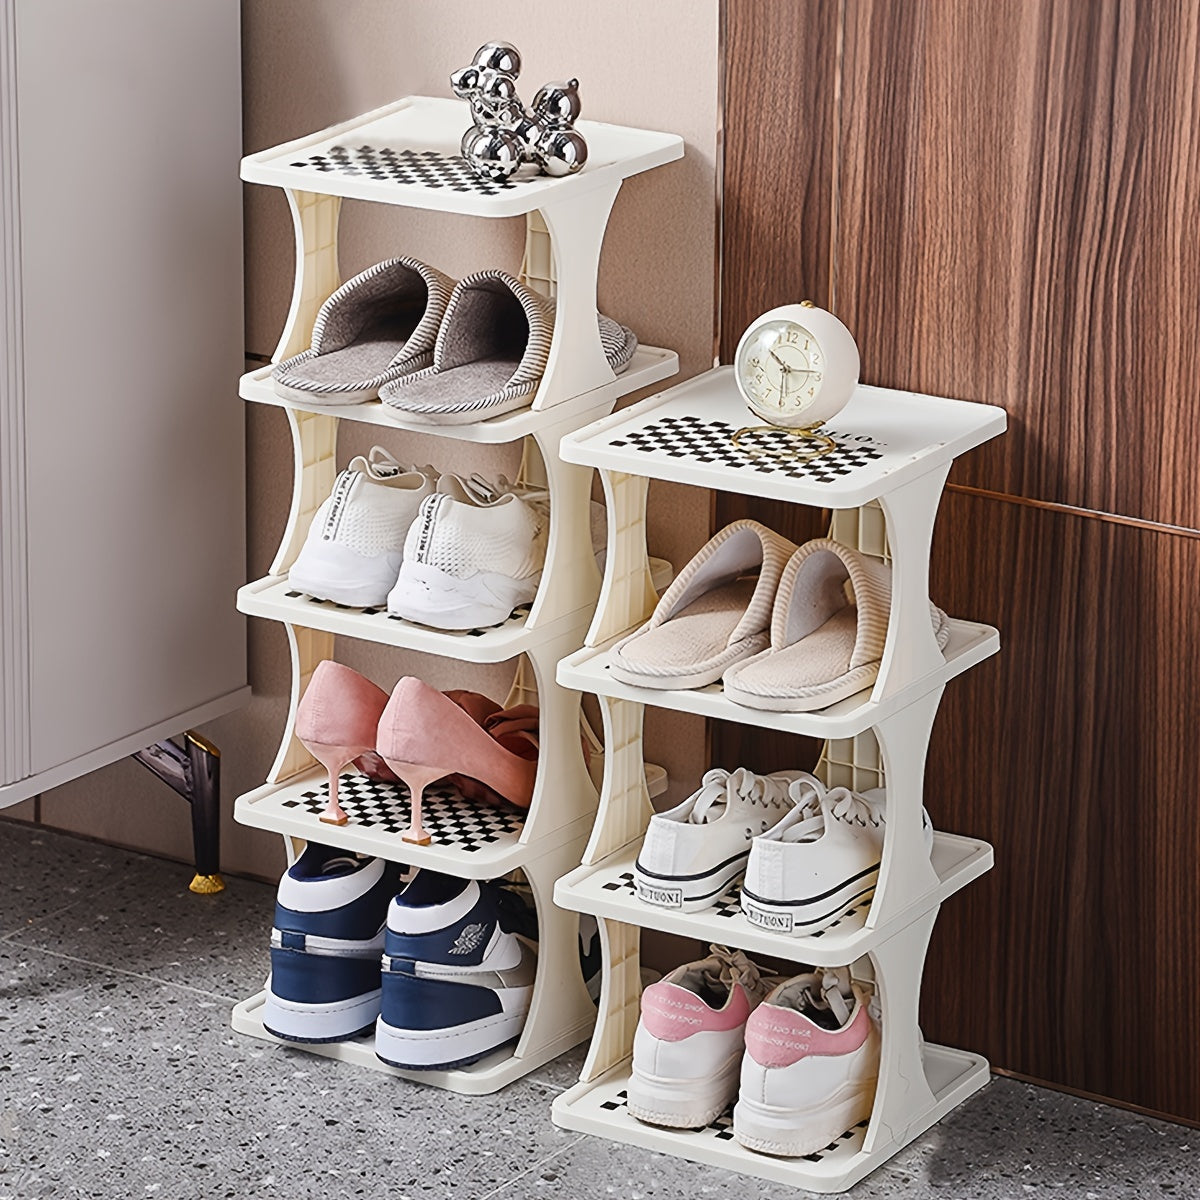 VENETIO Maximize Your Space with a 1pc Multi-Layer Shoe Rack - Perfect for Any Household Doorway! ➡ SO-00025